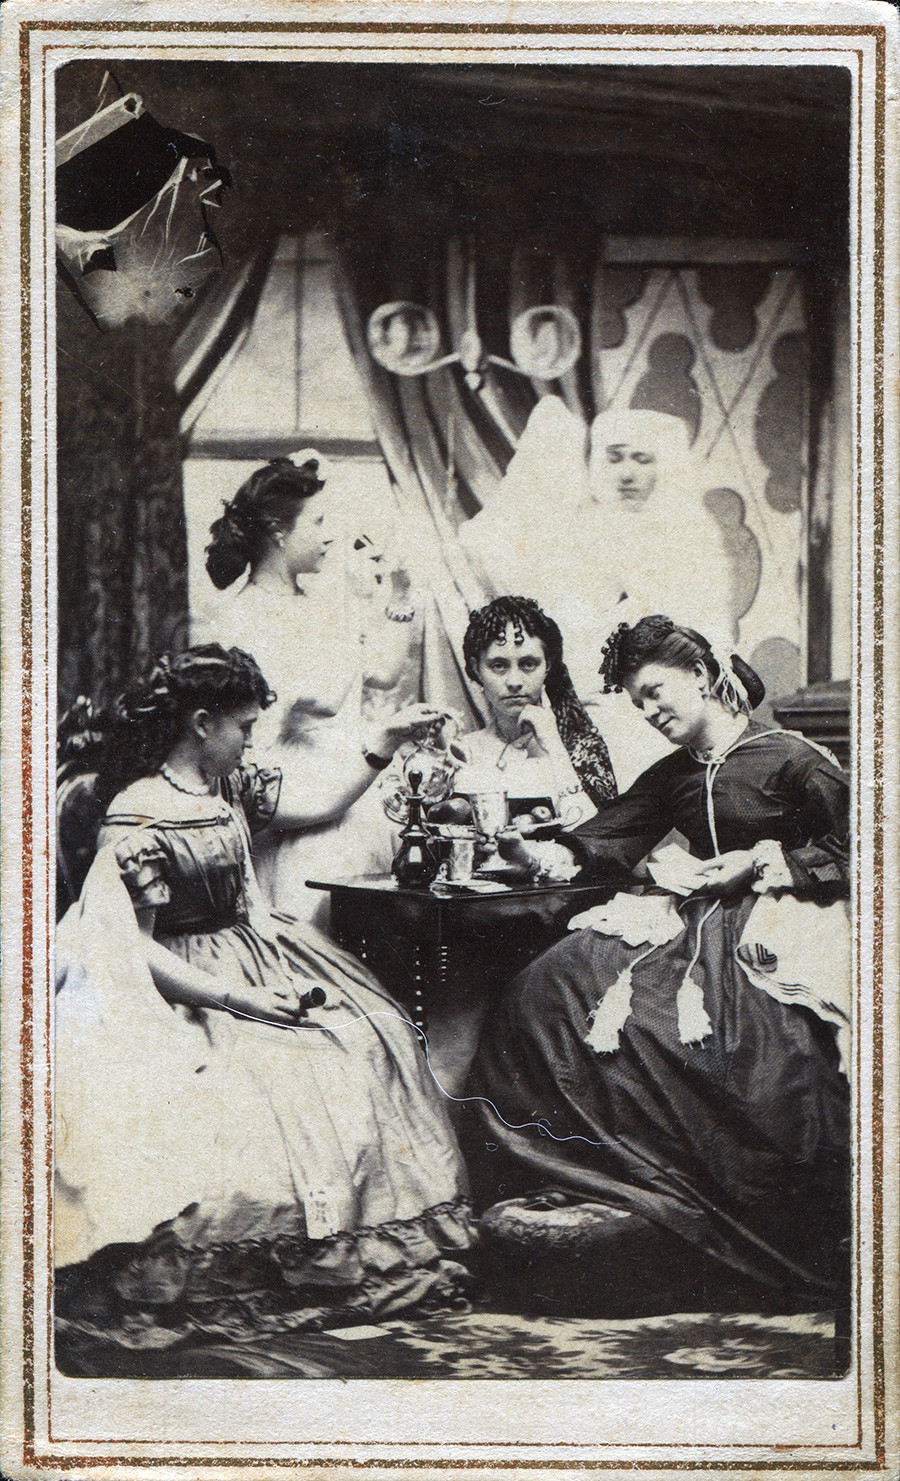 A group of young women meeting in a parlor. A ghostly figure is pictured in the background, Lowville, New York, circa 1860